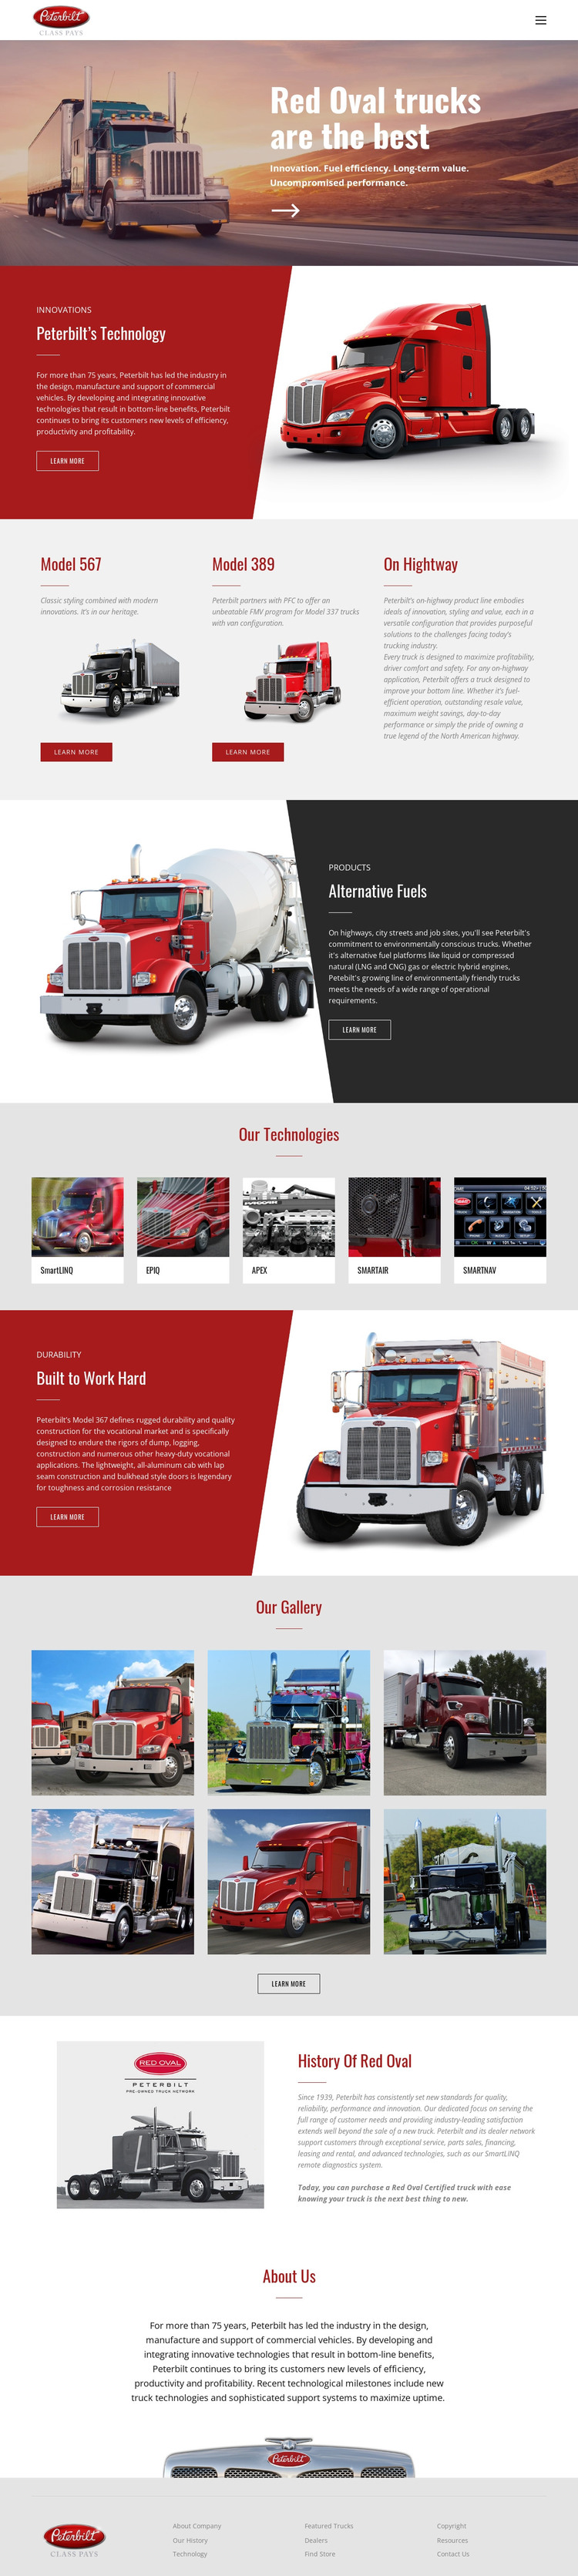 Red oval truck transportaion Web Design